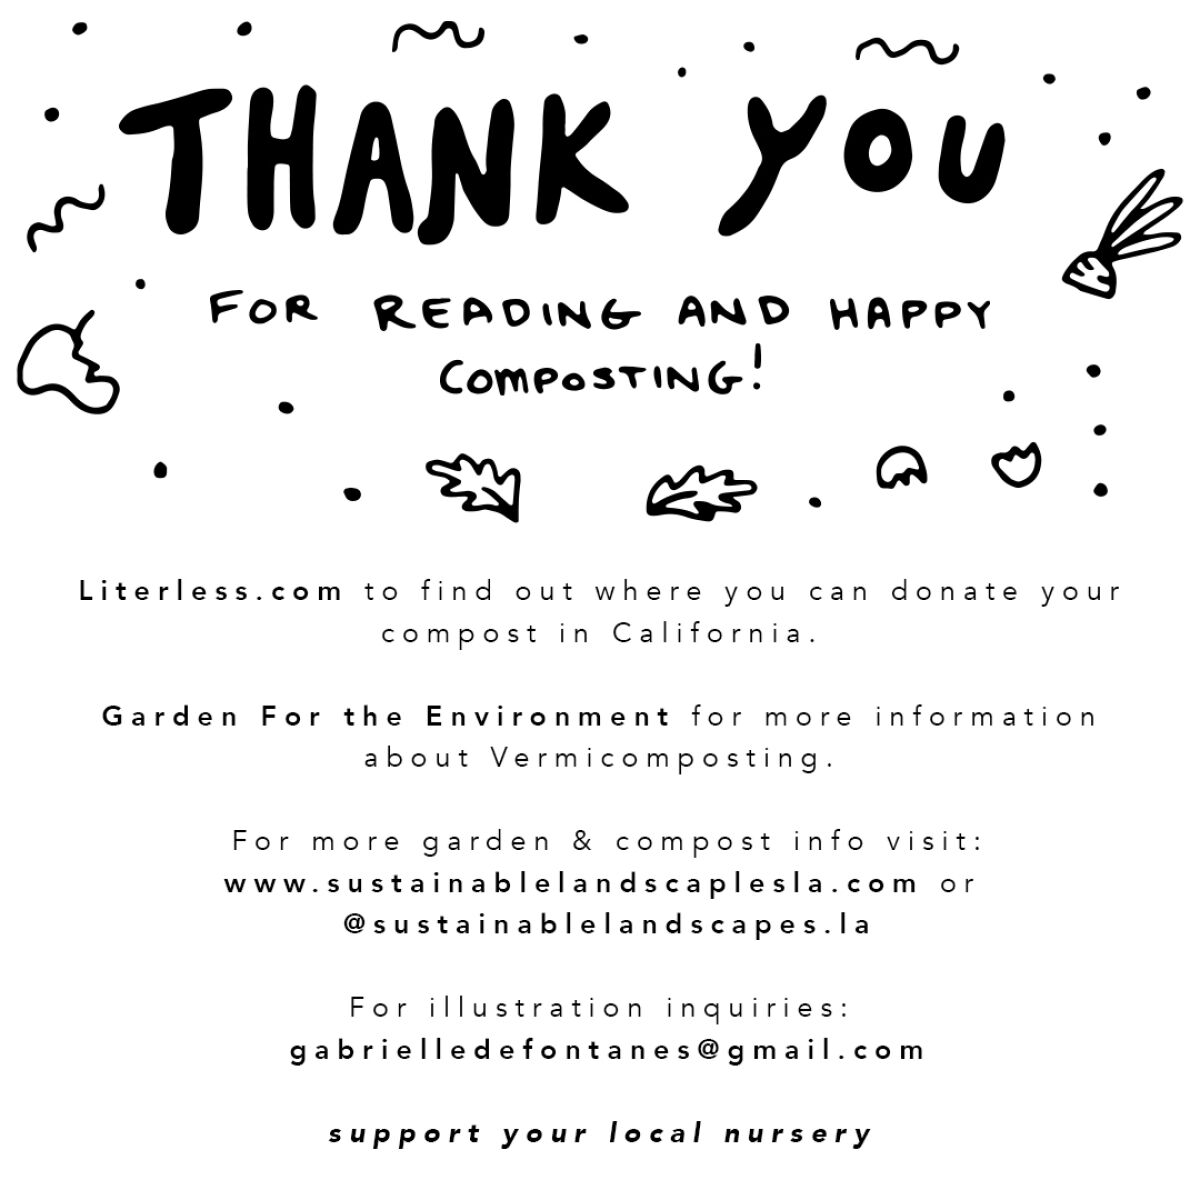 "Thank you for reading and happy composting!"